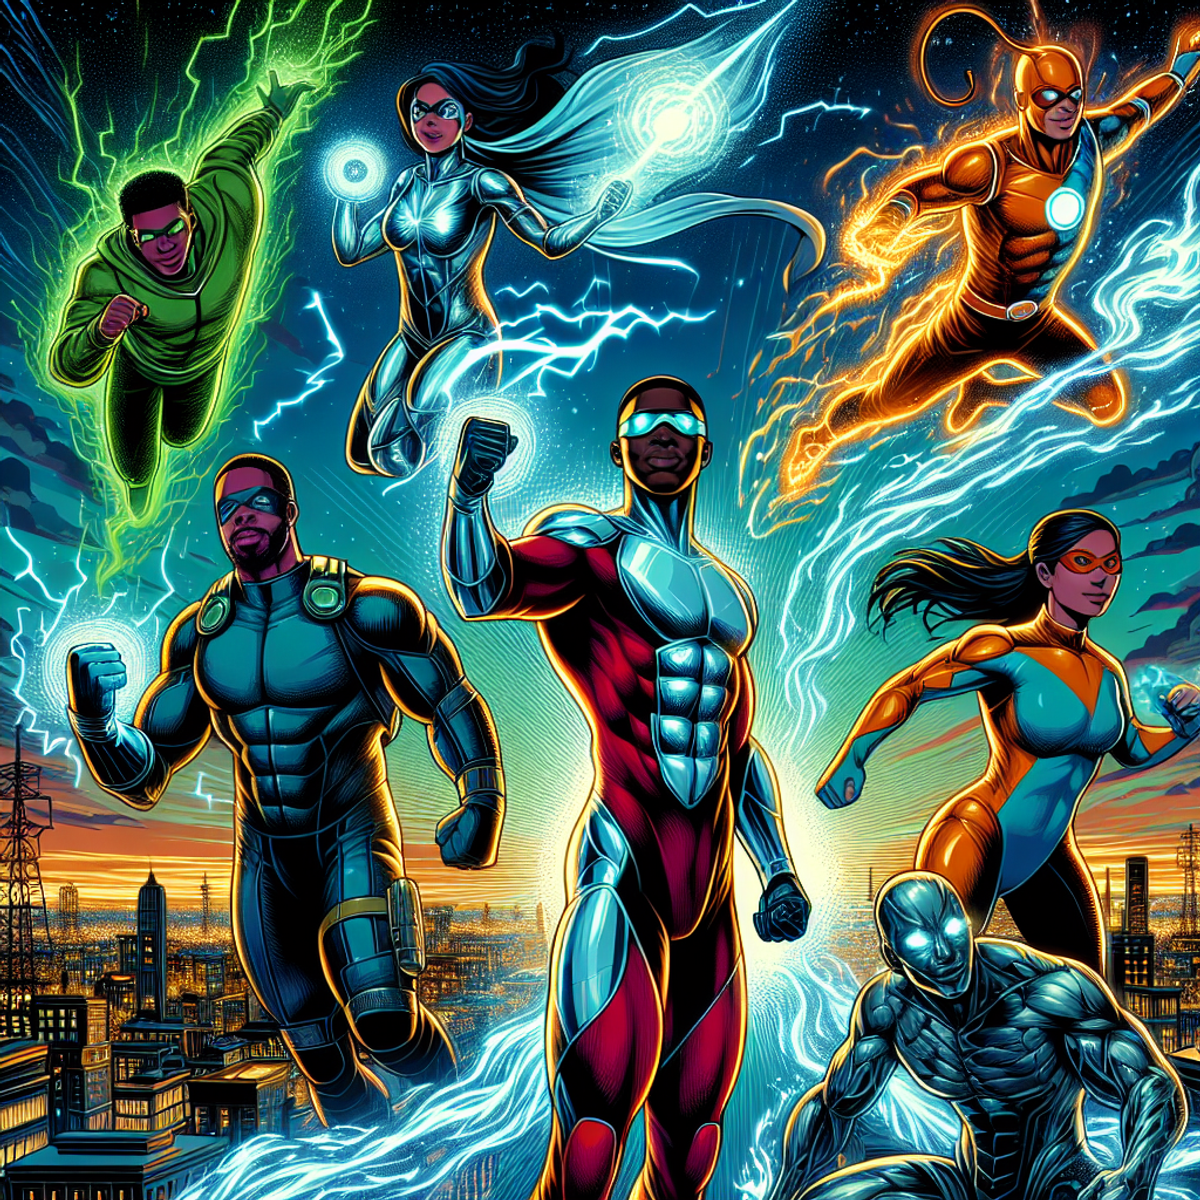 A group of diverse superheroes in a bustling metropolis under a twilight sky. A muscular Black man levitates mid-air with electricity crackling around his fists, a petite Hispanic woman controls water, a stealthy Middle-Eastern male hidden in the shadows with glowing blue eyes, and a South Asian woman flies with a jetpack leaving a trail of stardust behind her.